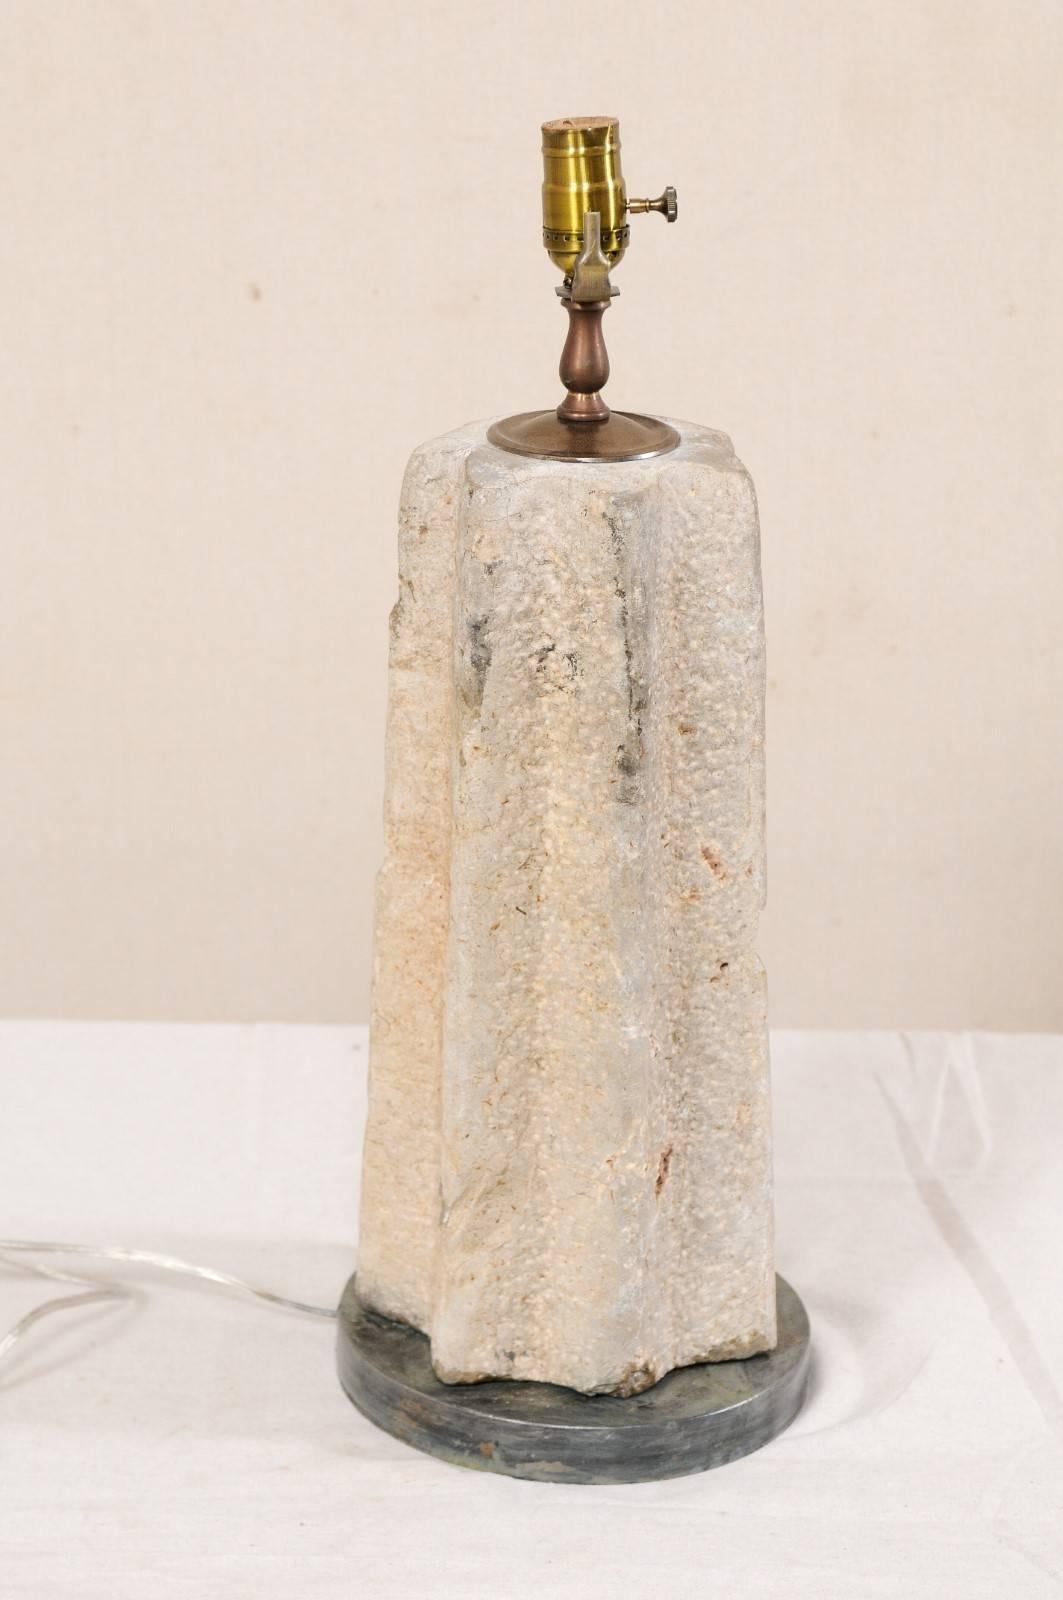 A single custom table lamp from a section of 19th century millstone. This single table lamp has been custom fashioned from a cut section of a 19th century millstone, mounted with it's body tapered more towards the neck, and grinding ridges vertical.